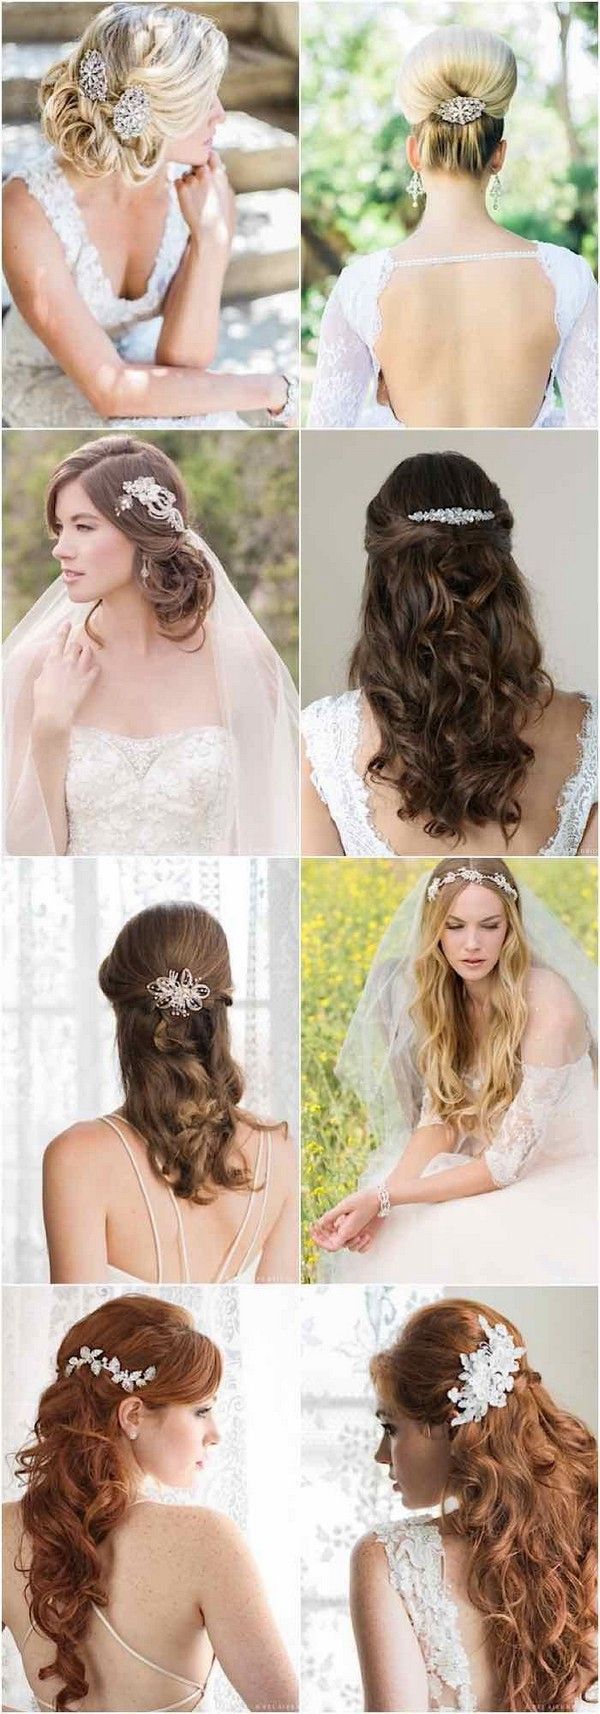 Favorite Bridal Chignon Hairstyles With Headband And Veil In 100+ Romantic Long Wedding Hairstyles 2019 – Curls, Half Up, Updos (View 16 of 20)